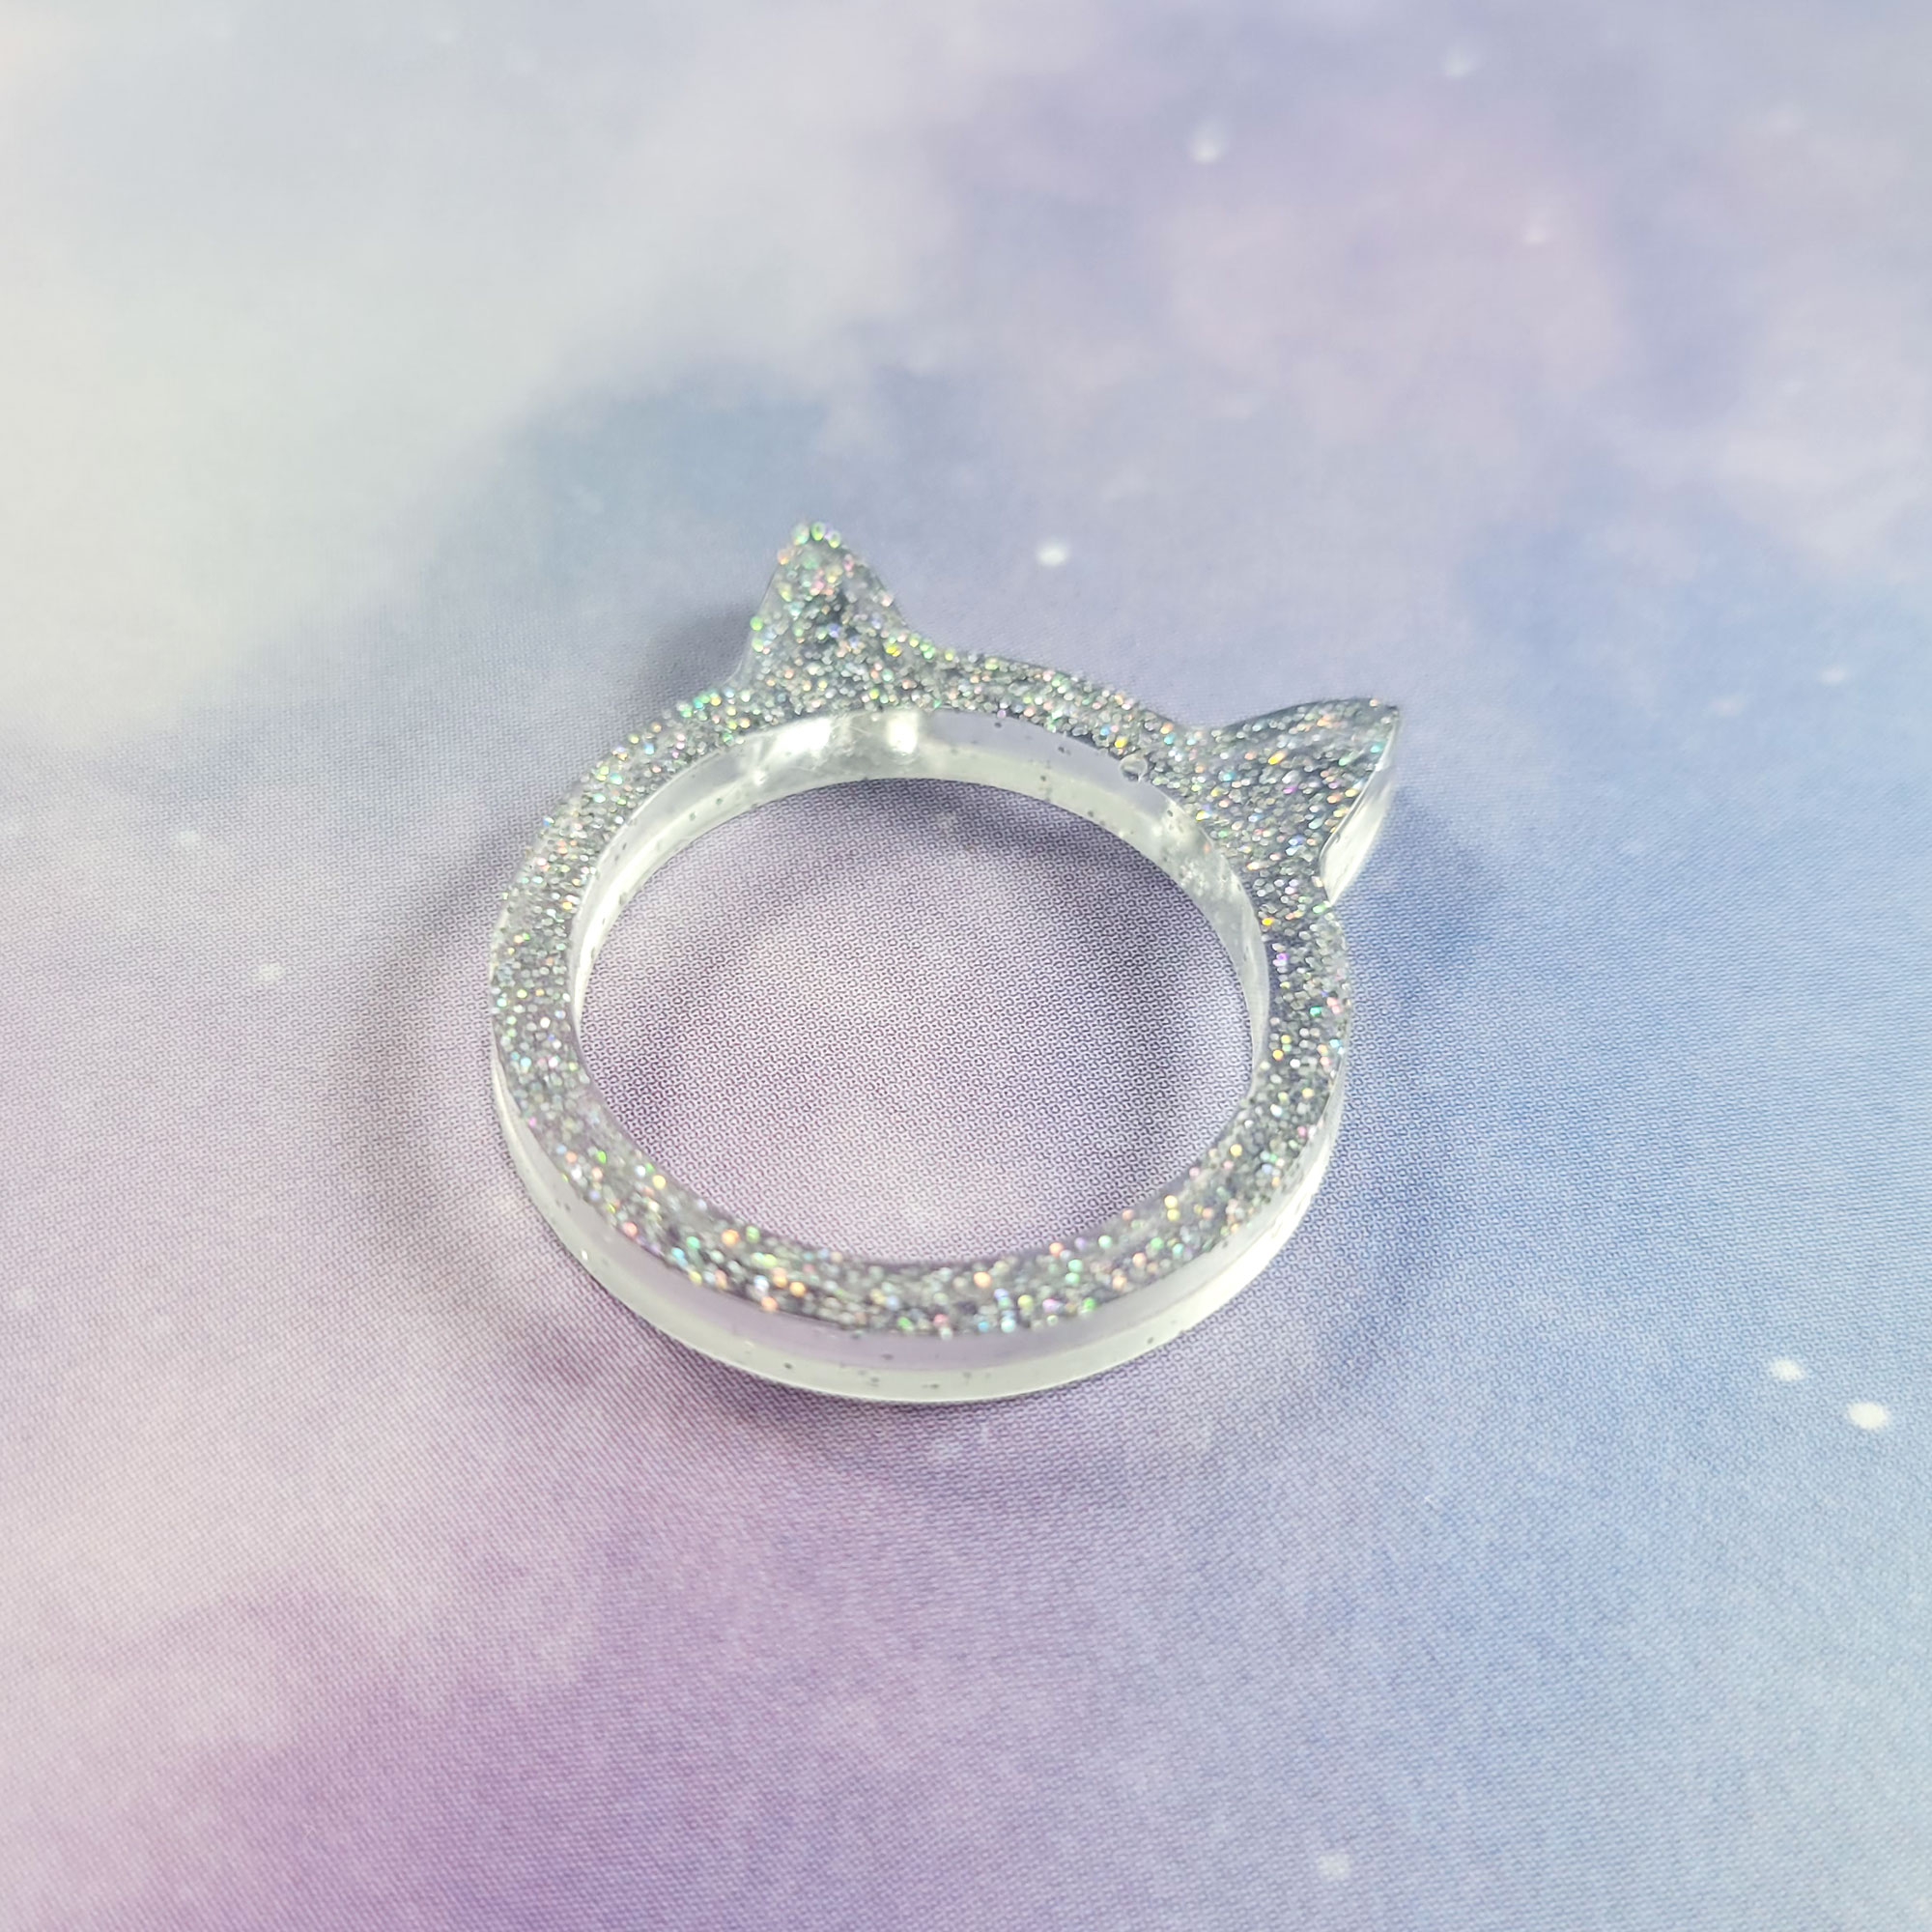 Silver Holo Kawaii Kitty Ring by Wilde Designs